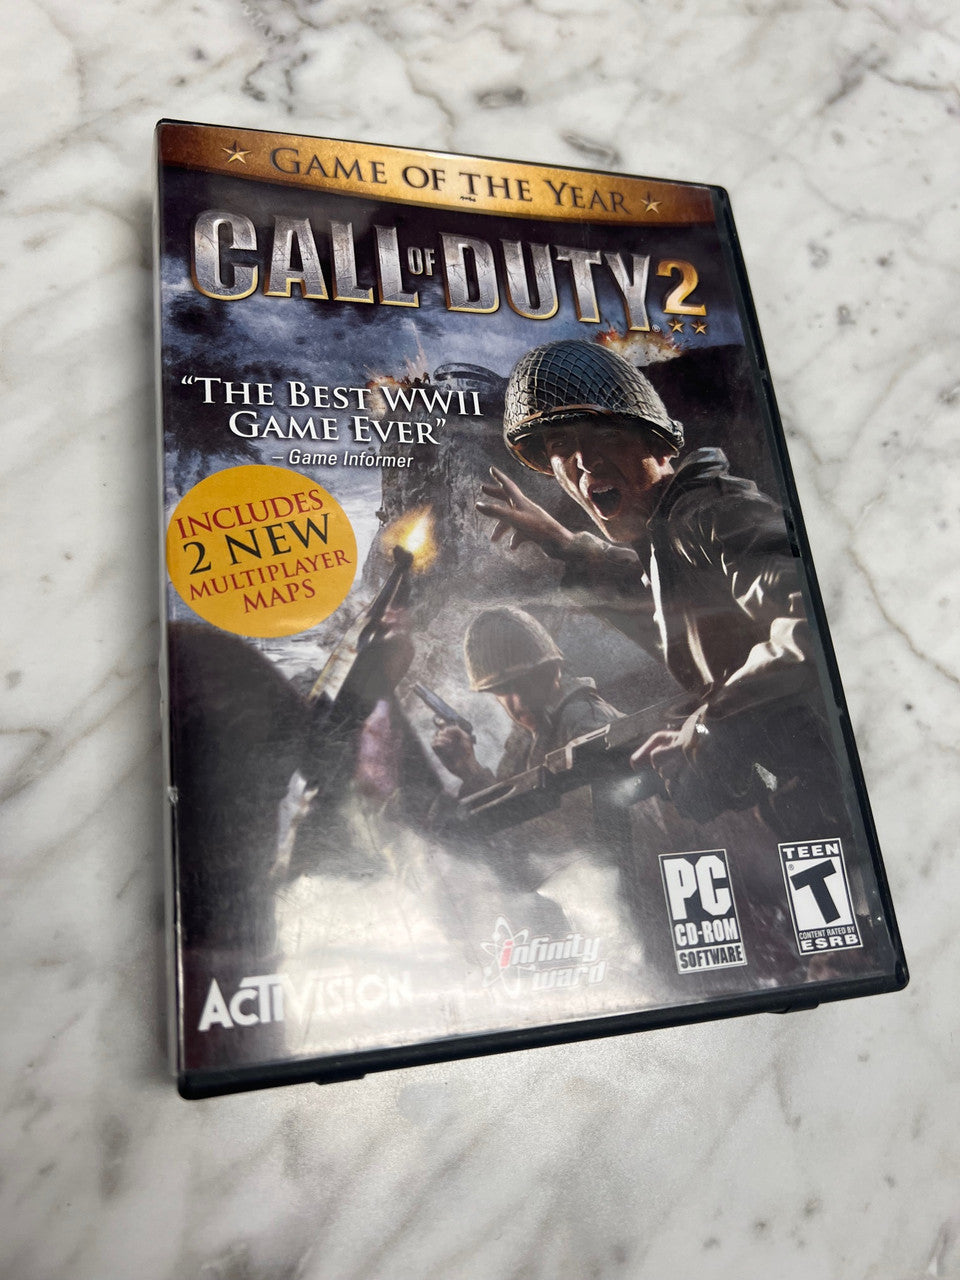 CALL OF DUTY 2 Game of the Year PC CD-ROM W/ Discs 1-6 Manual